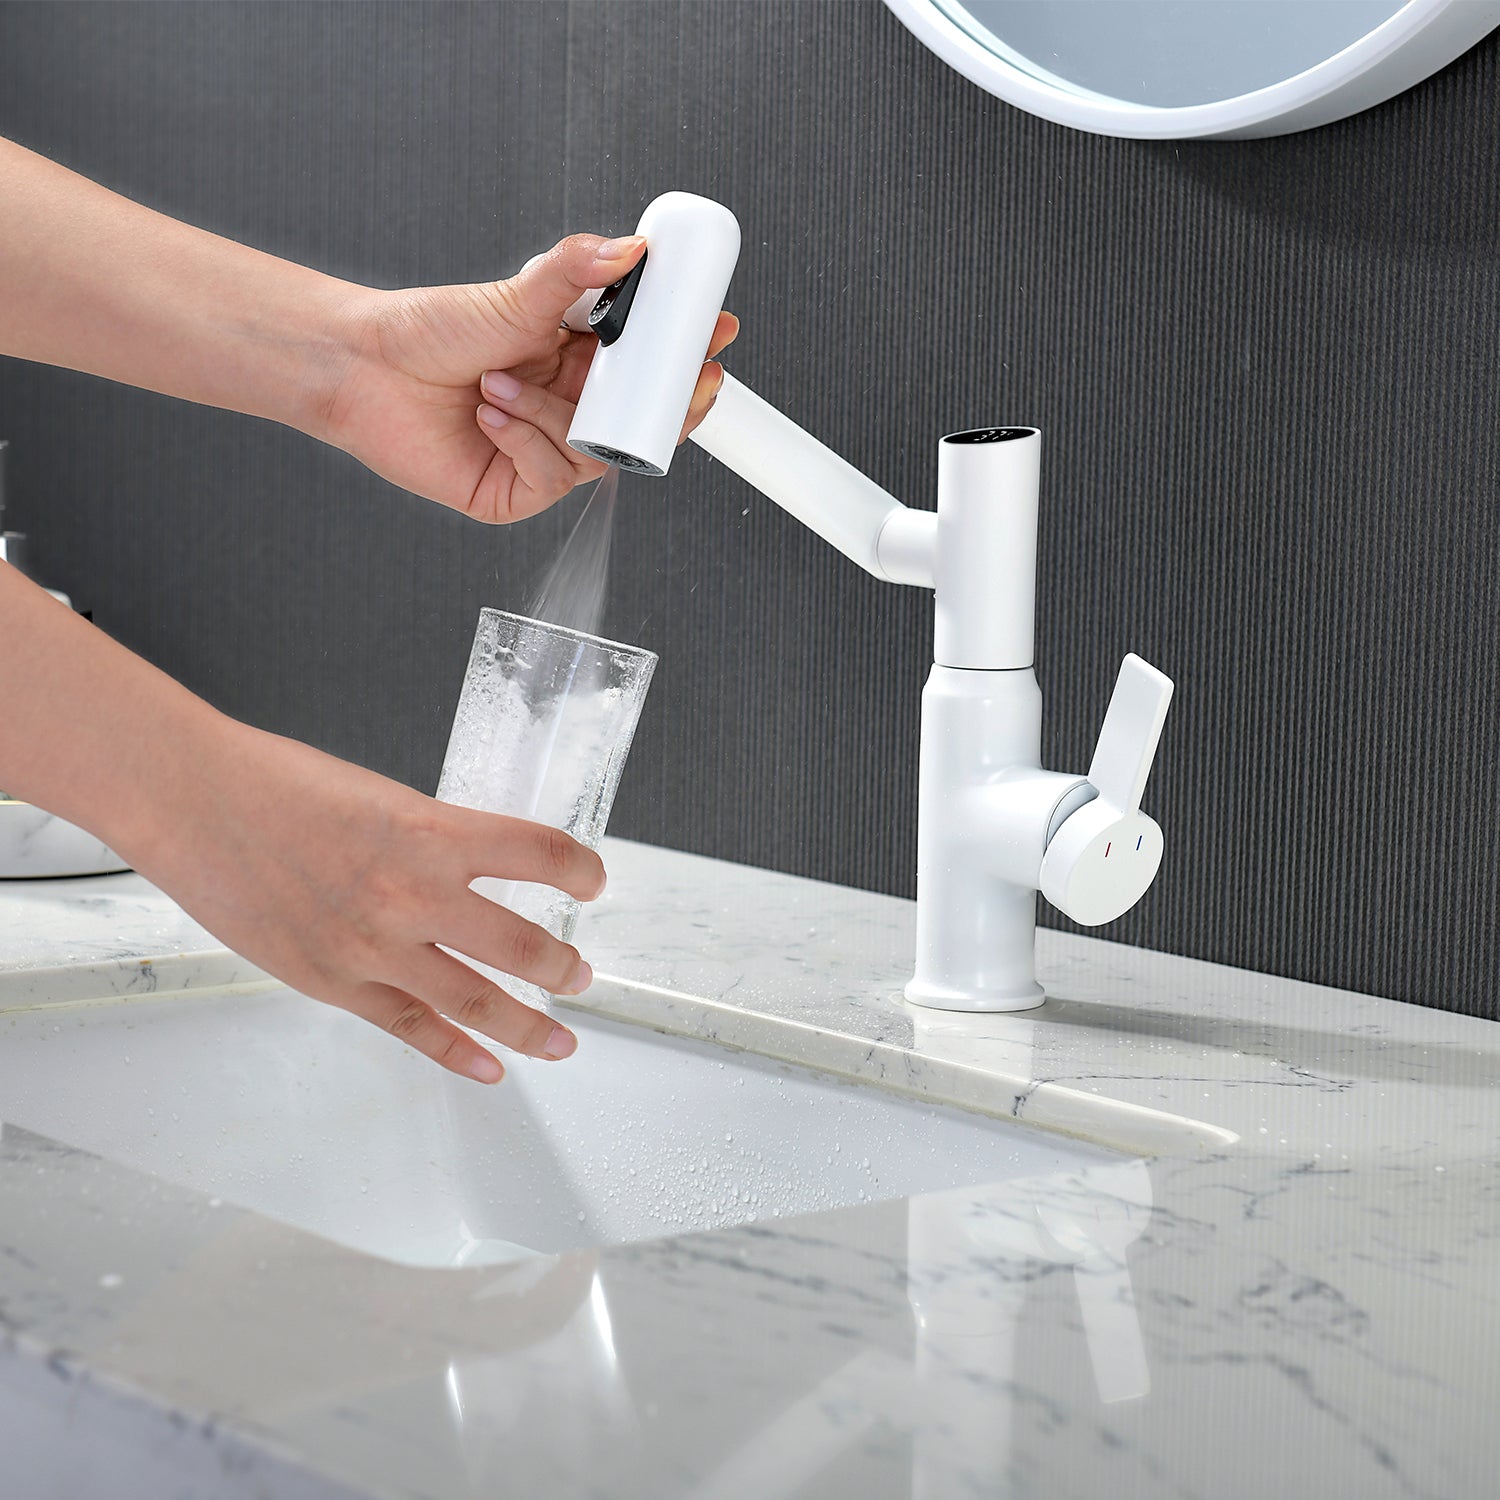 BF2204-4, Lefton Single-Hole Rotatable Faucet with Temperature Display